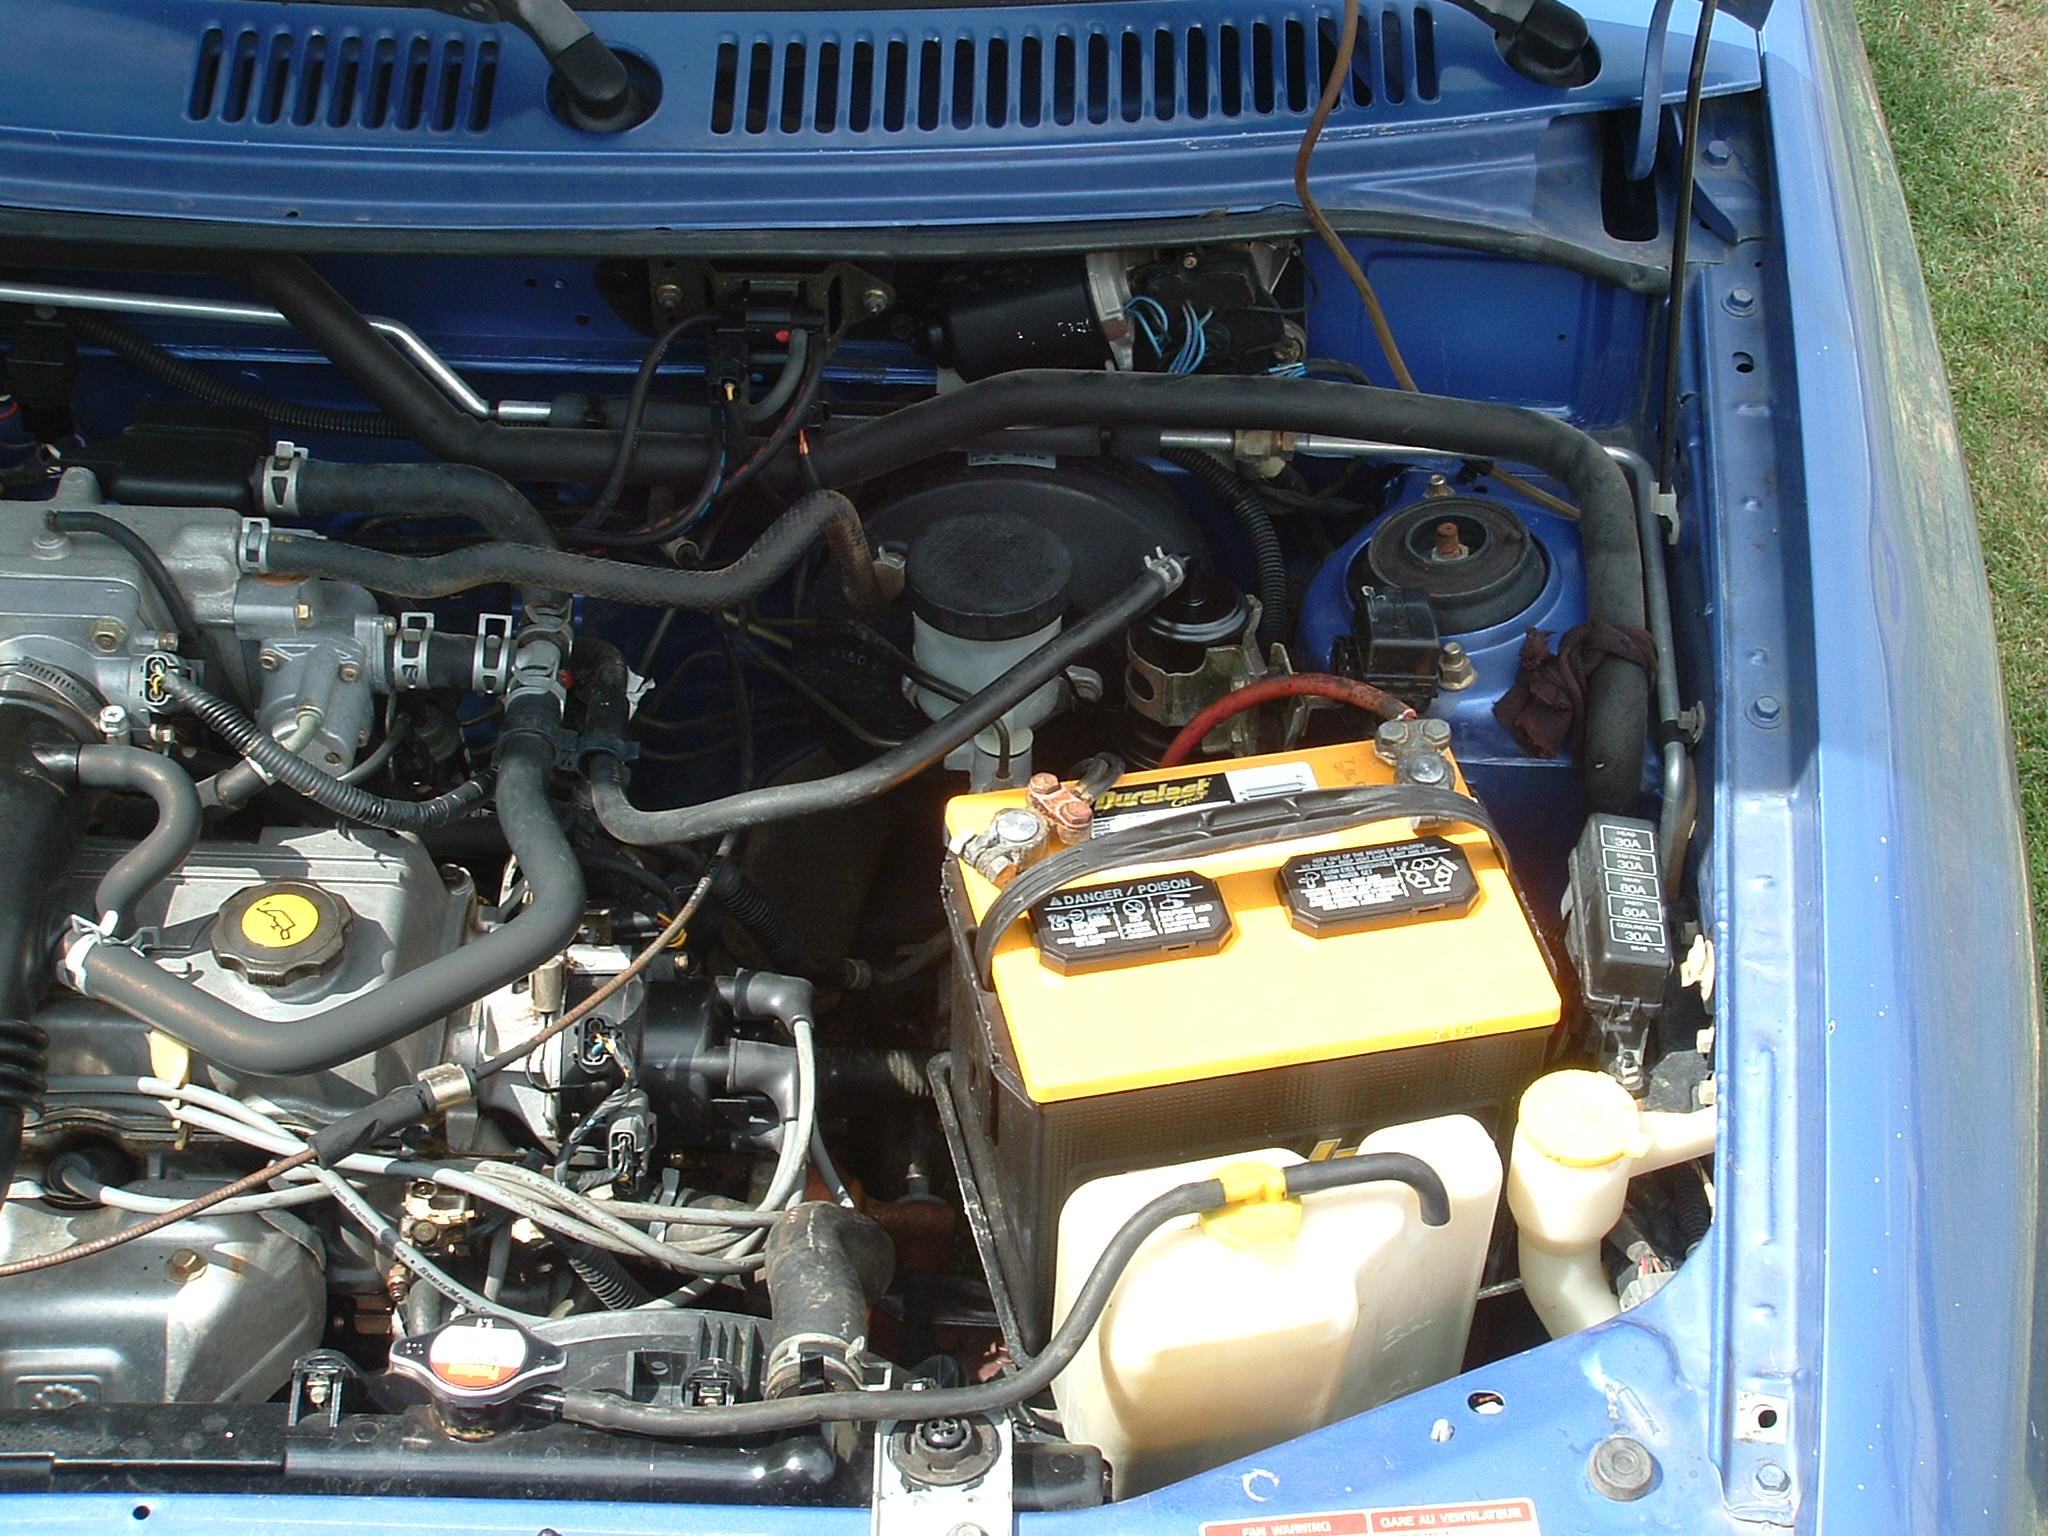 The engine of a ford aspire #4